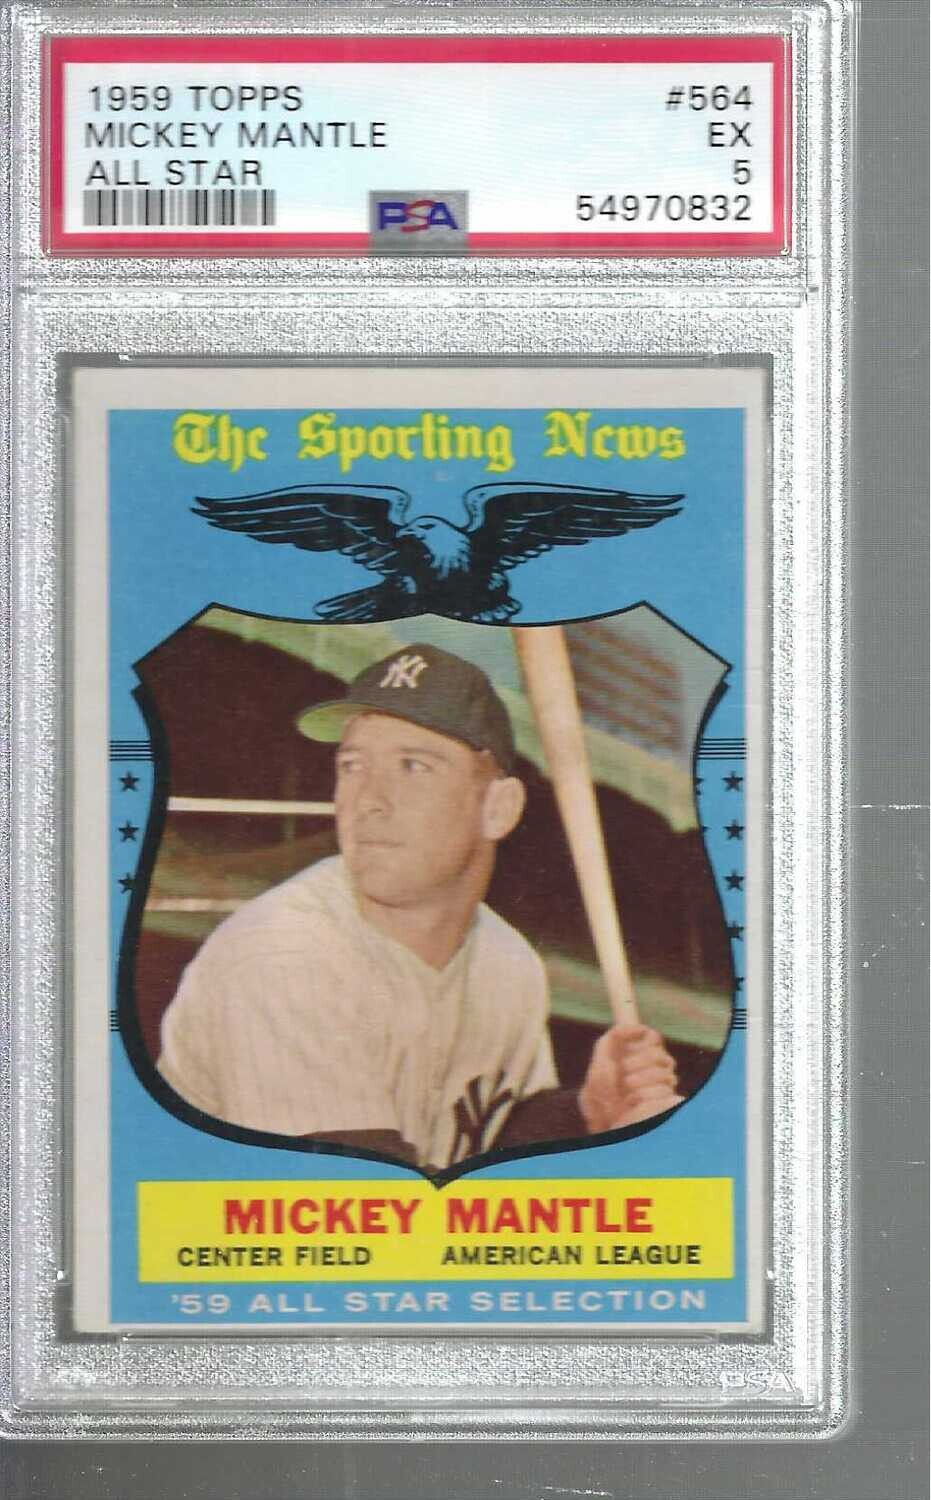 1959 Topps #564 Mickey Mantle All Star PSA 5